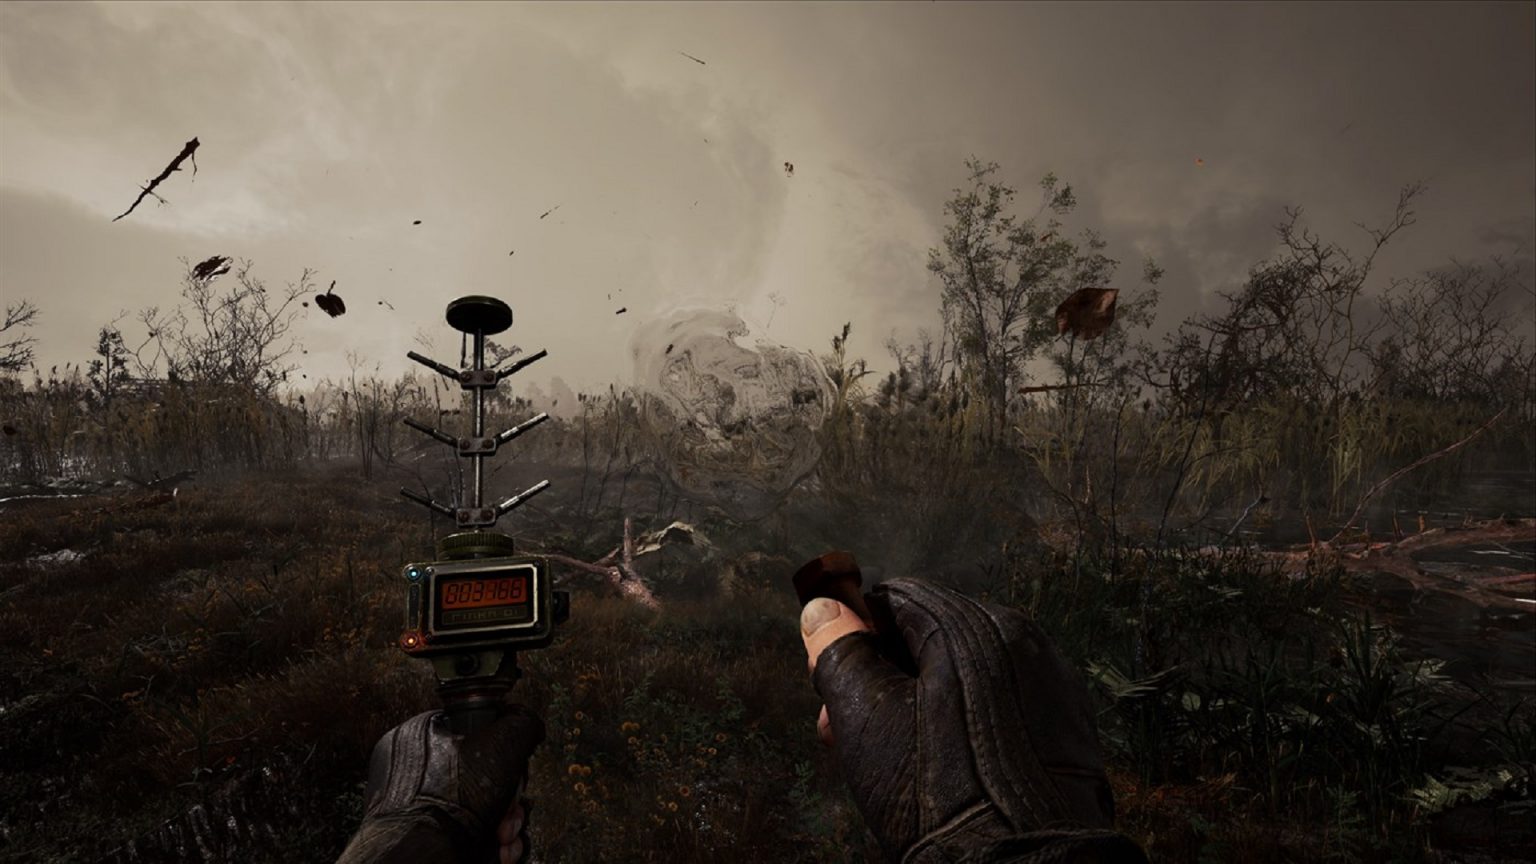 S.T.A.L.K.E.R. 2: Heart of Chernobyl instal the new for apple